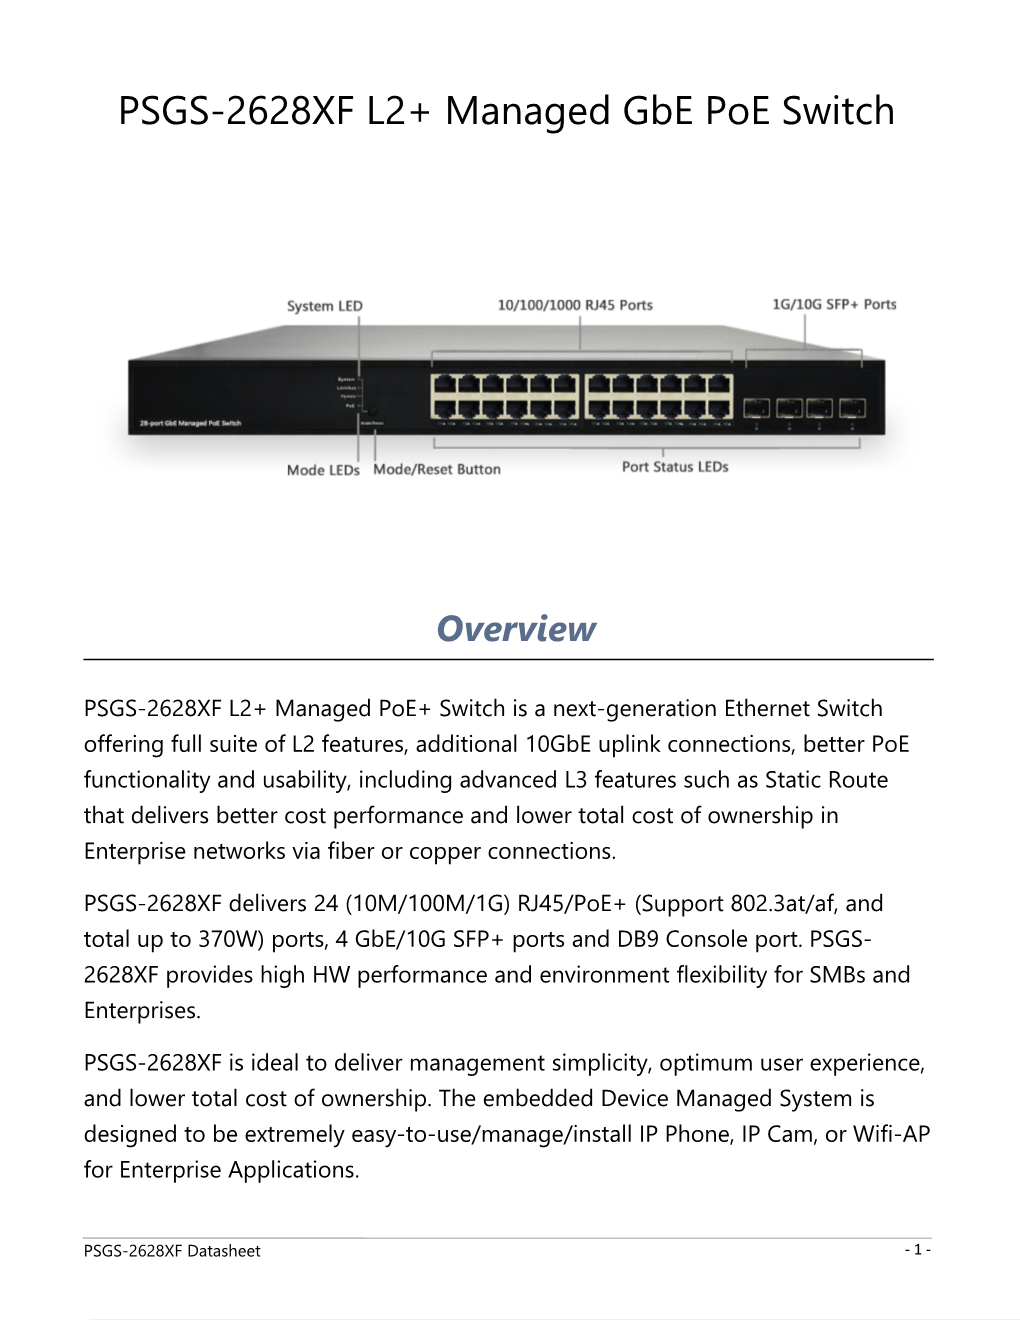 PSGS-2628XF L2+ Managed Gbe Poe Switch